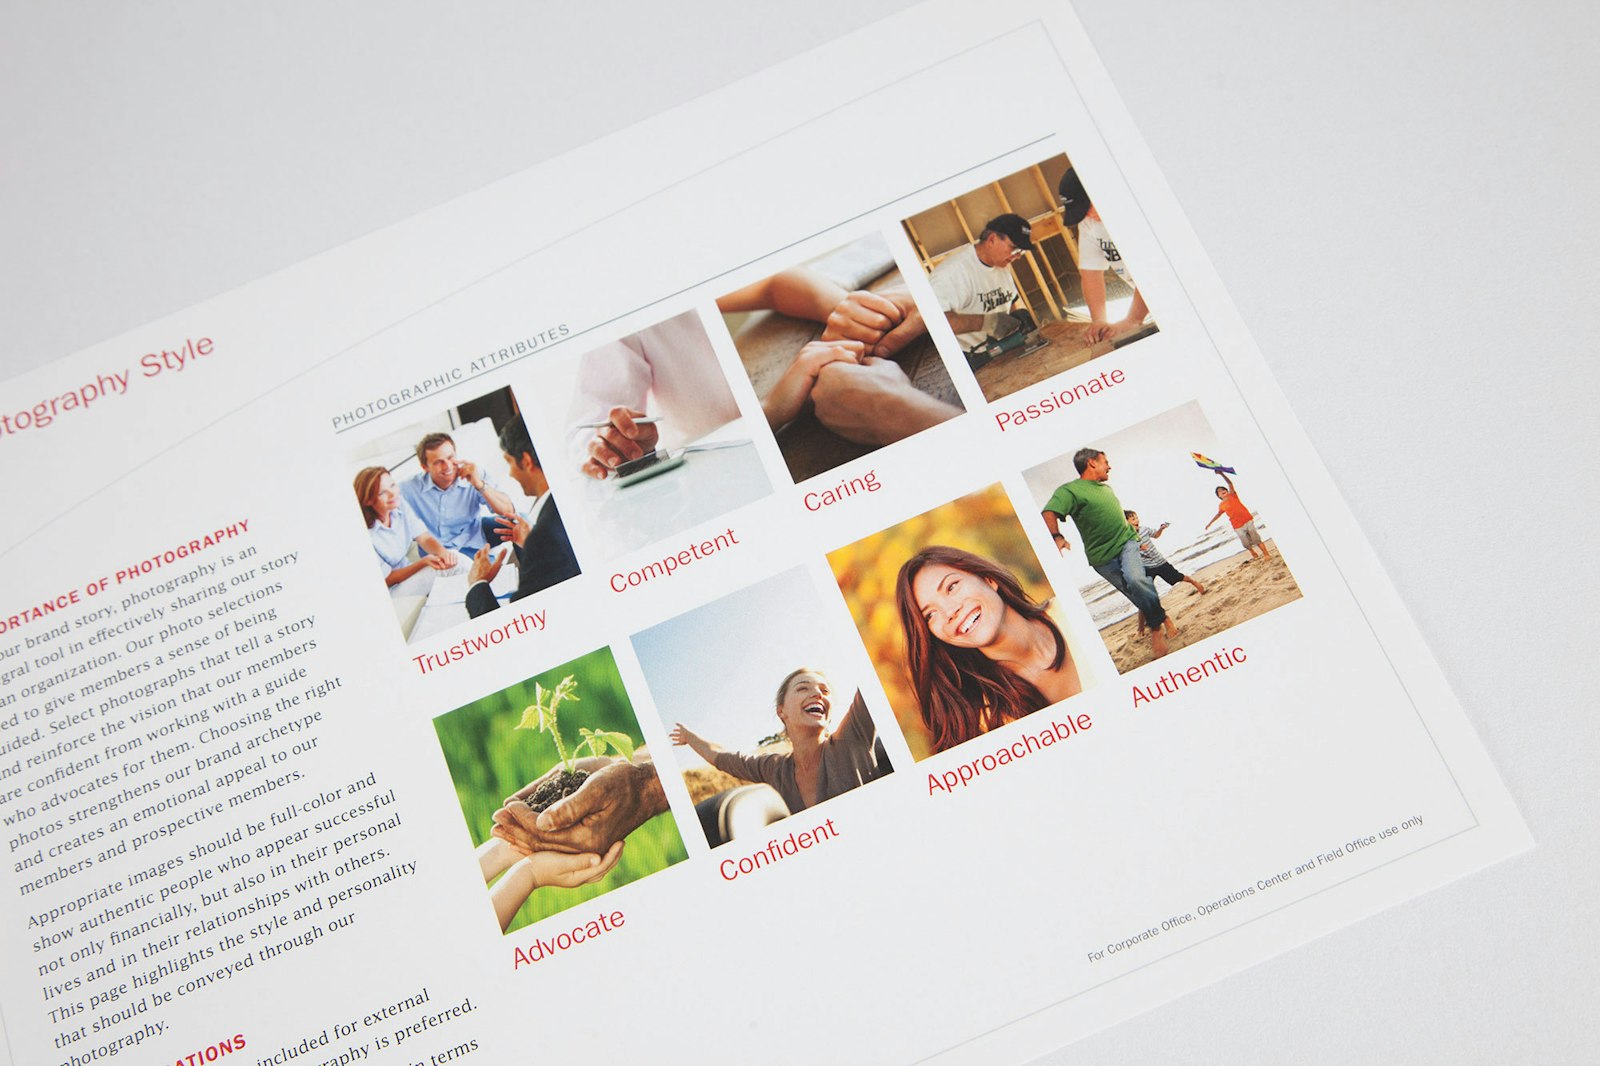 Interior pages of brand guidelines for Thrivent Financial showing the photographic attributes standards.